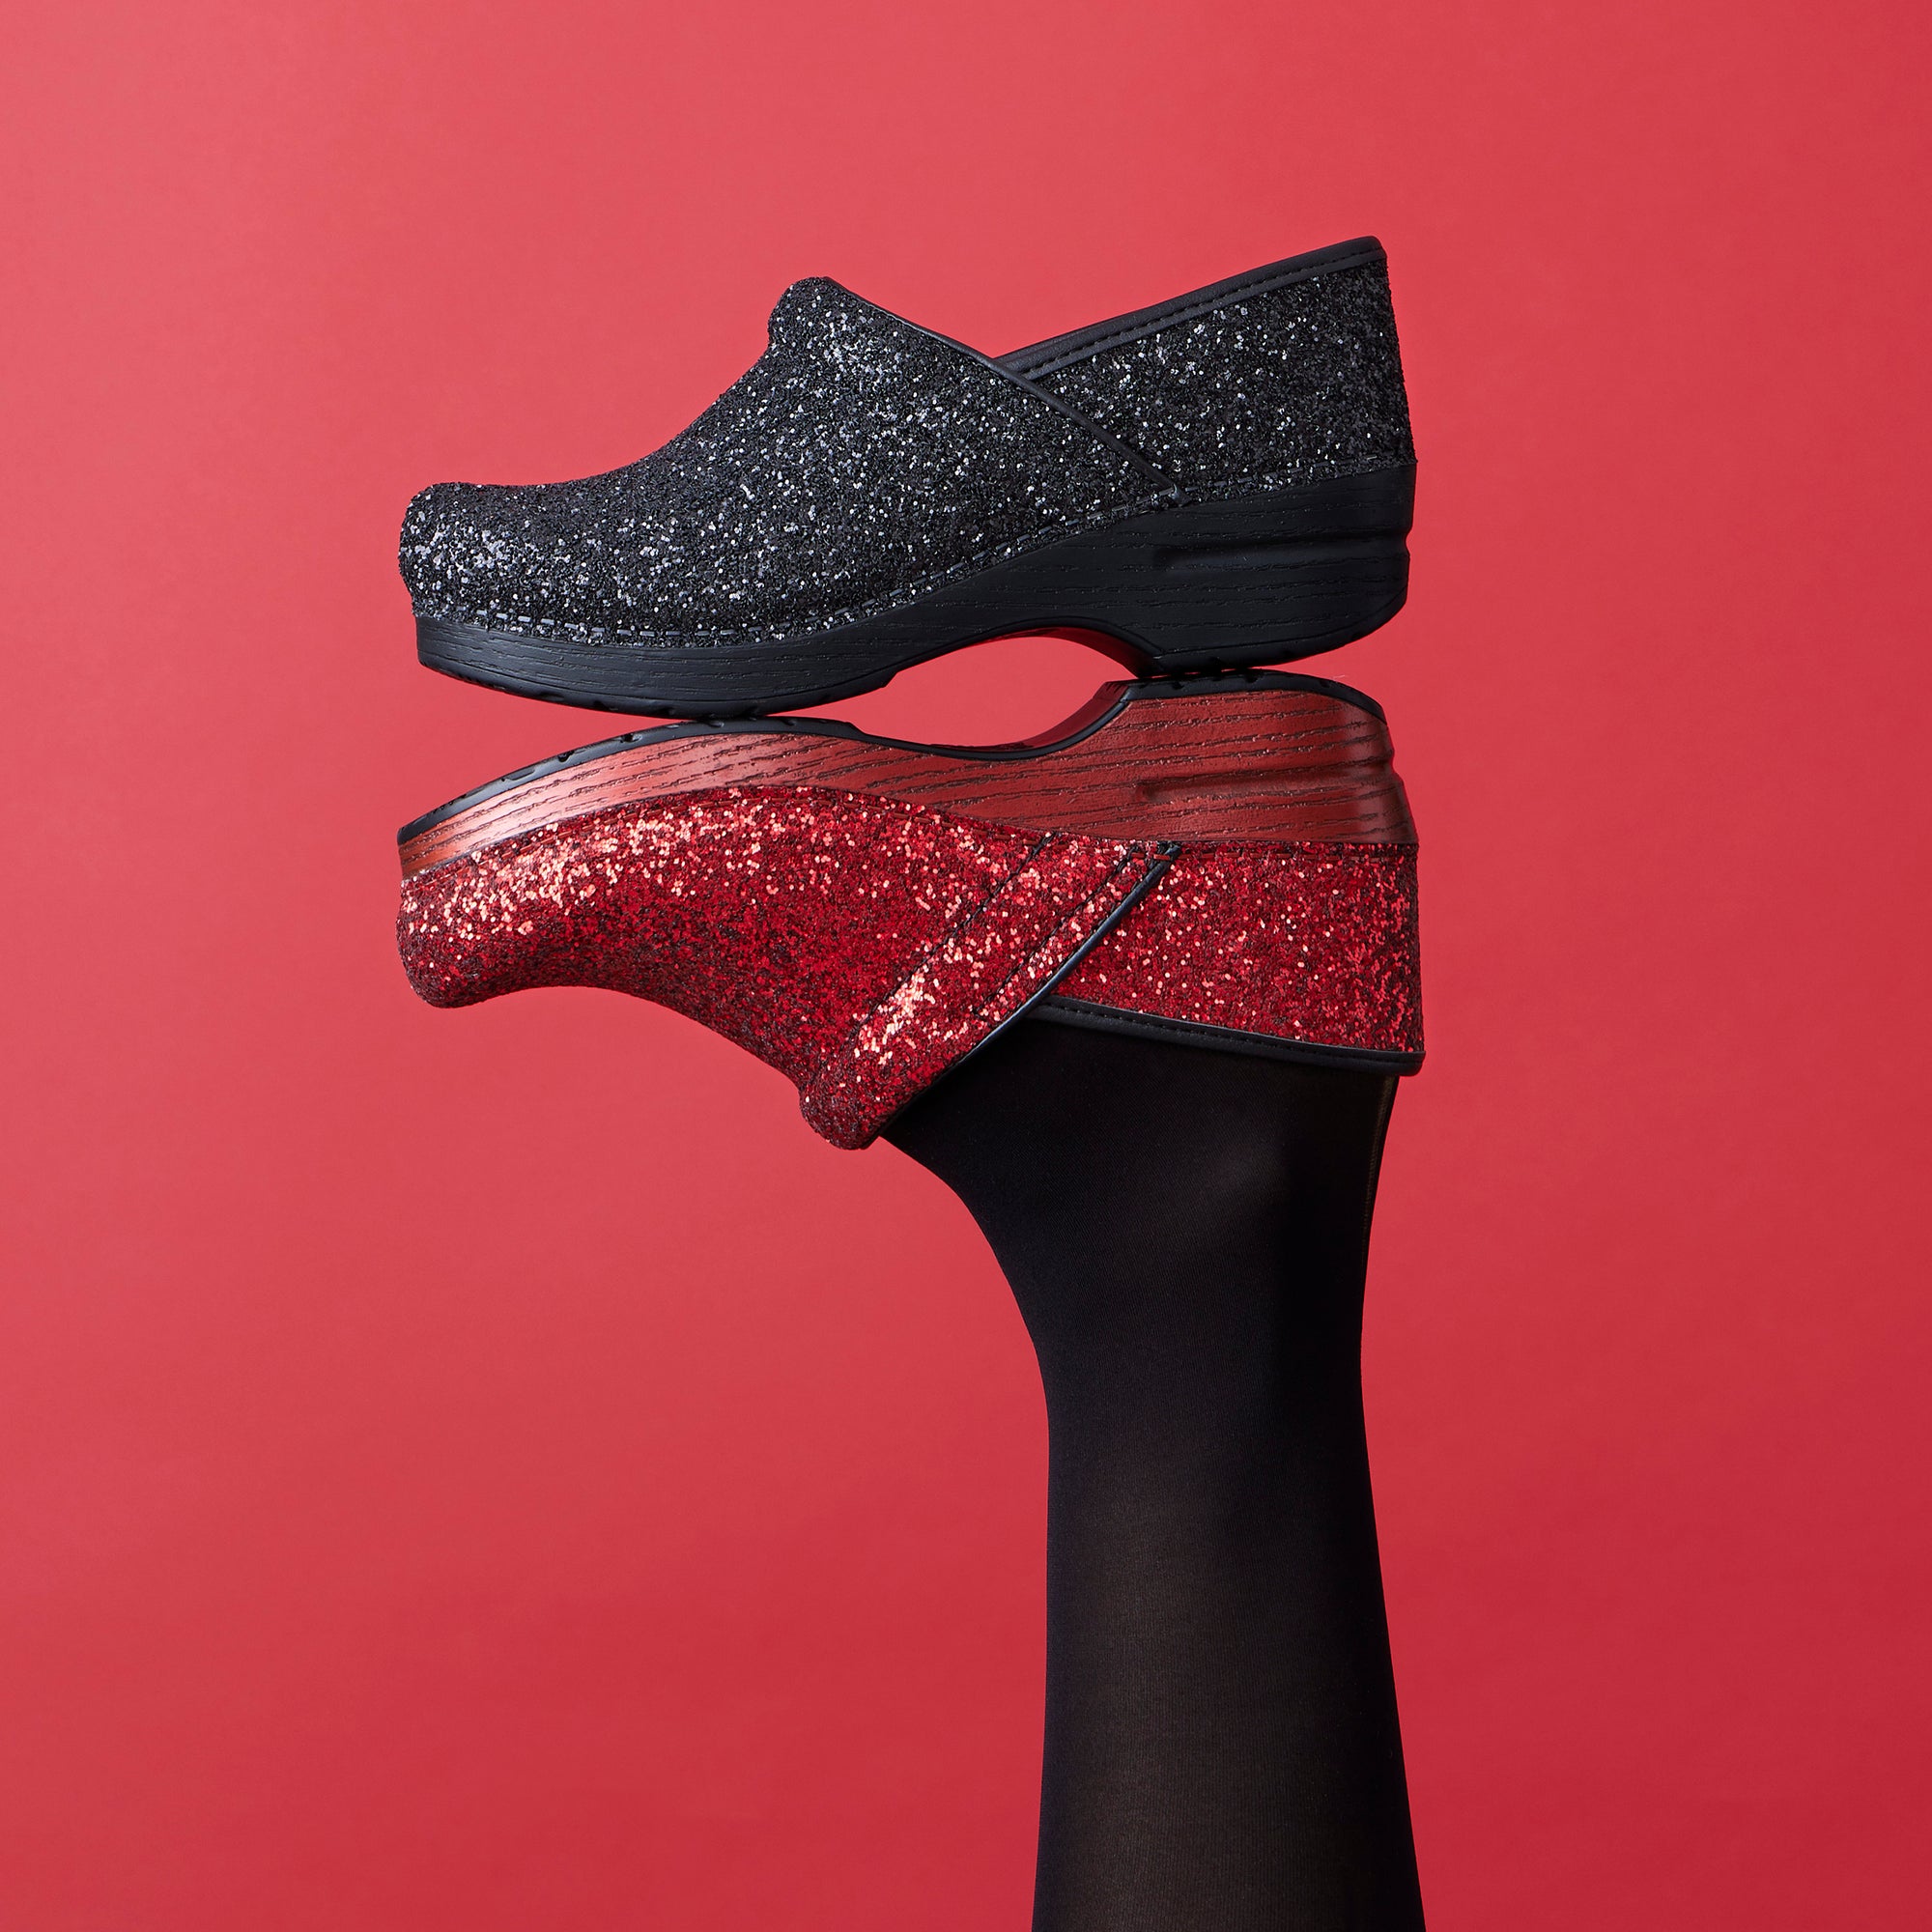 Sparkling and shining novelty clogs shown in red and black.